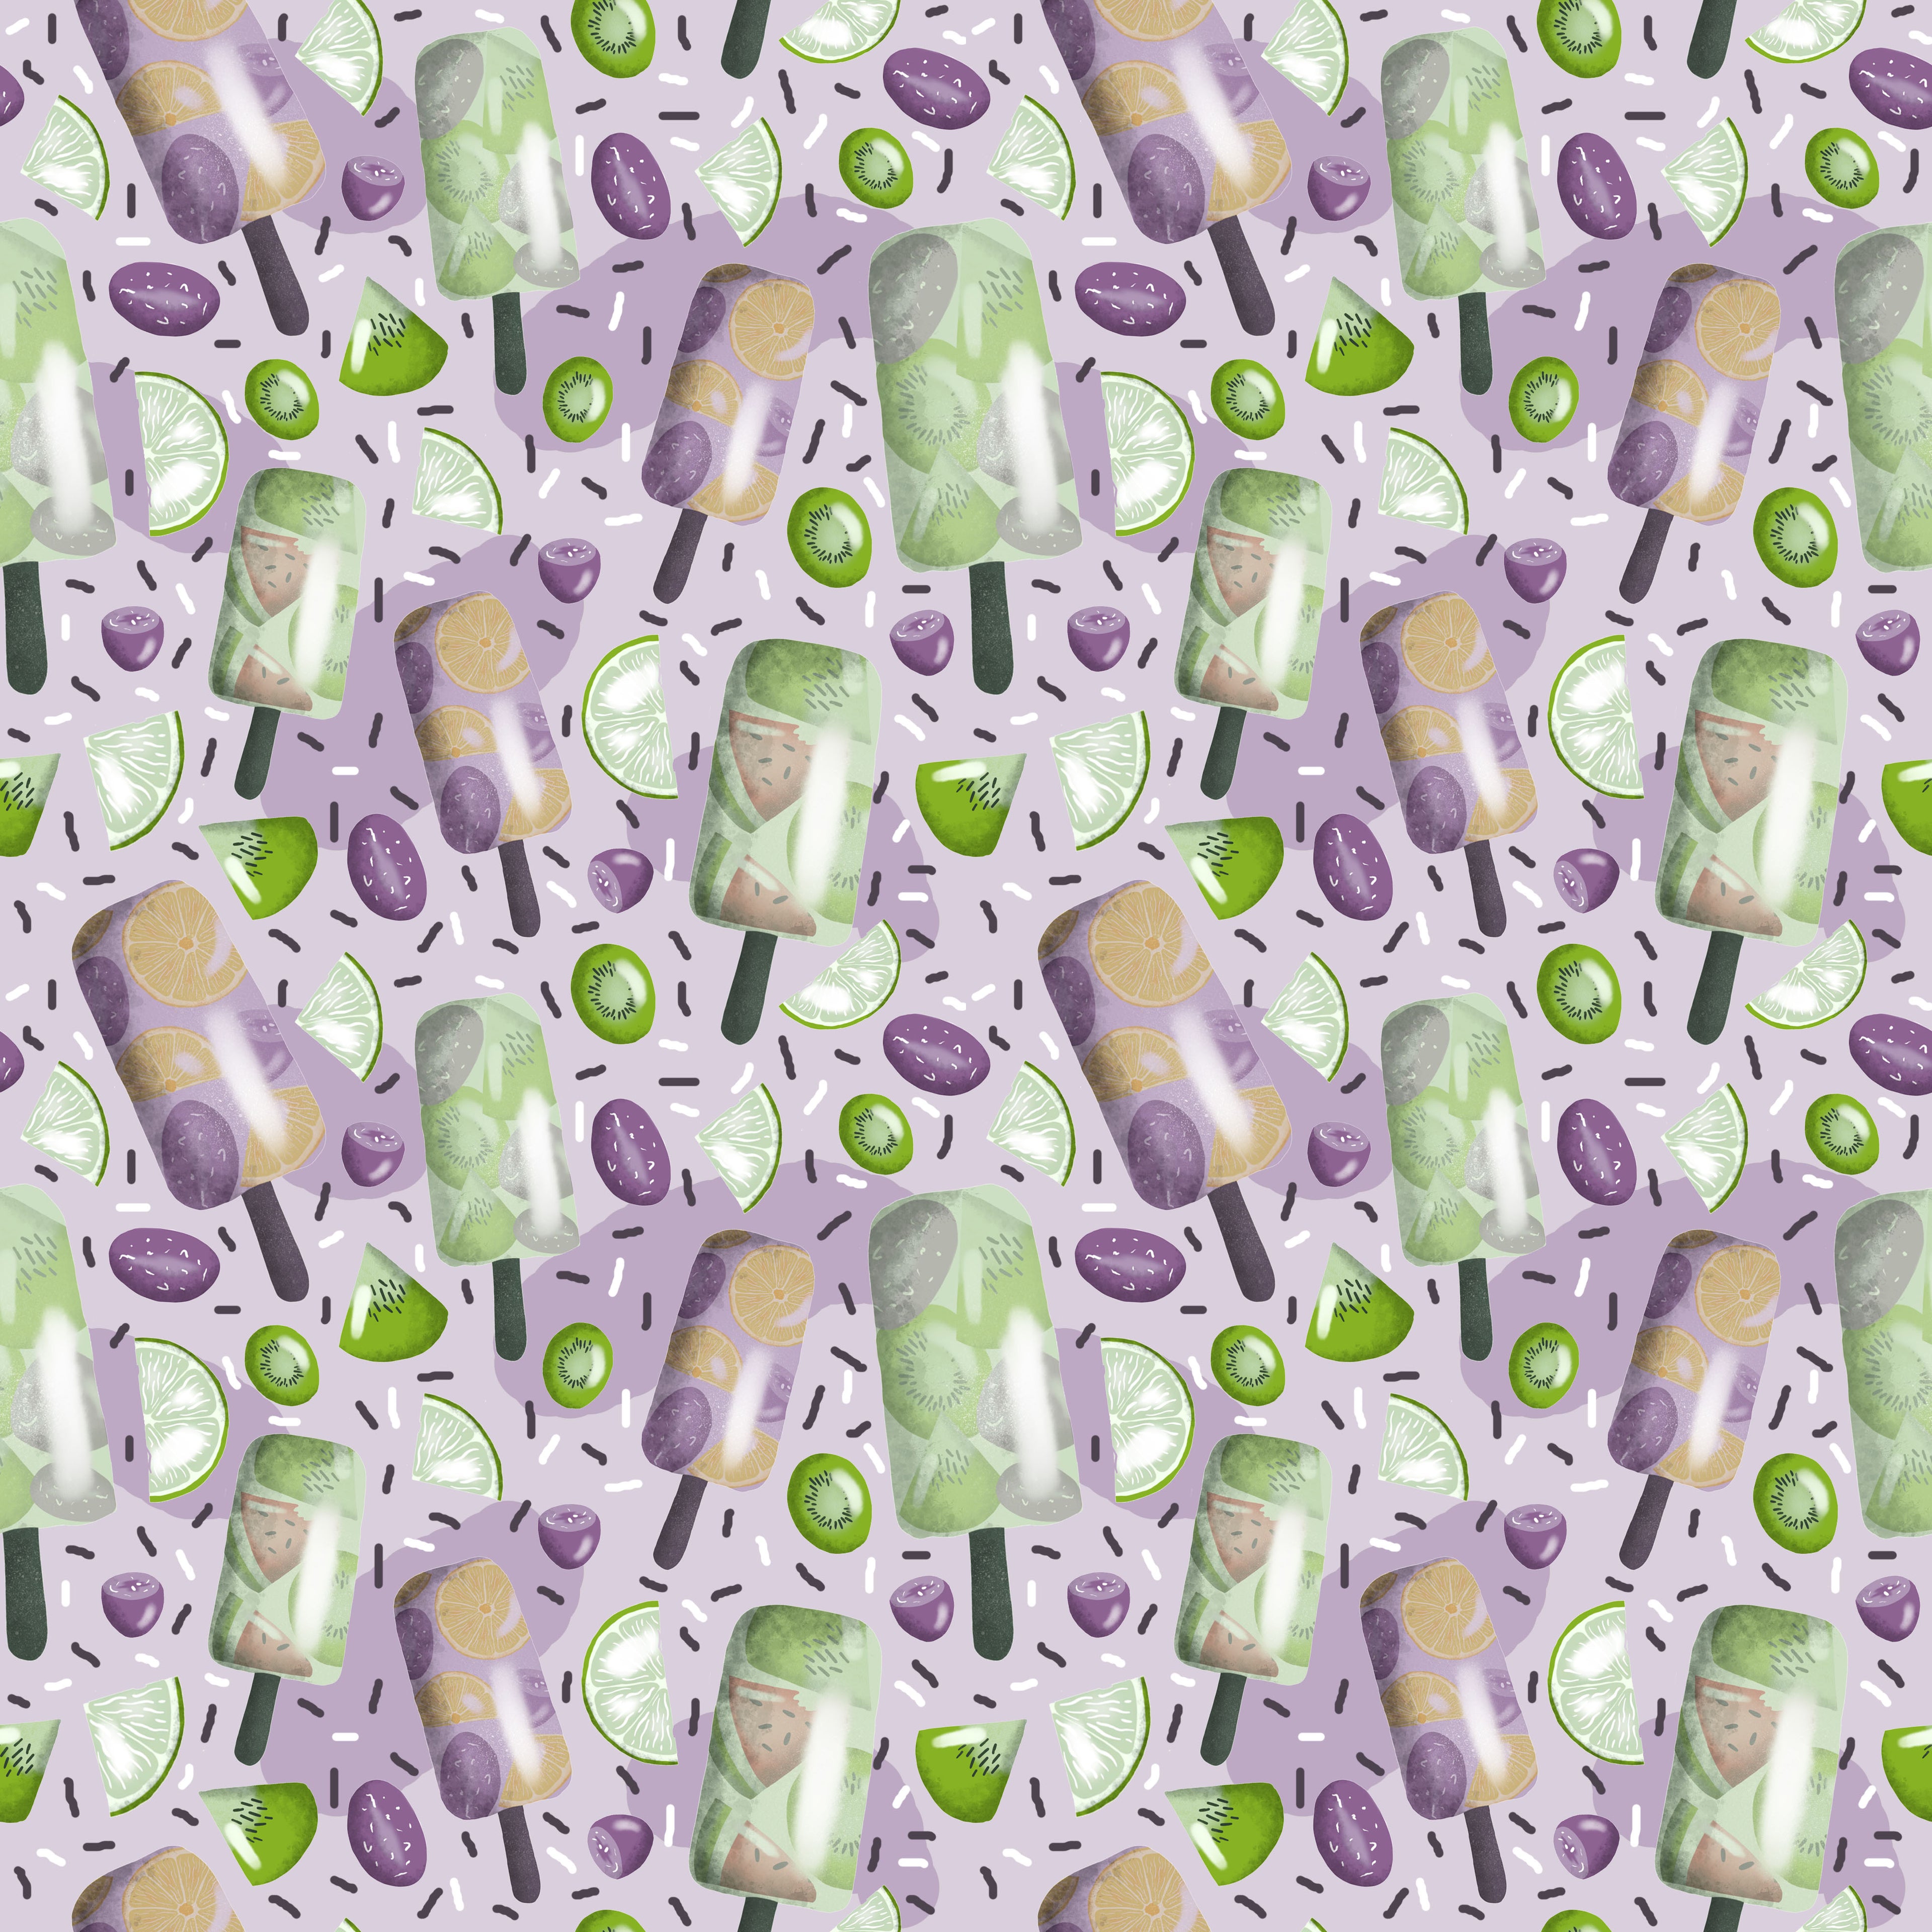 ice lolly surface pattern design